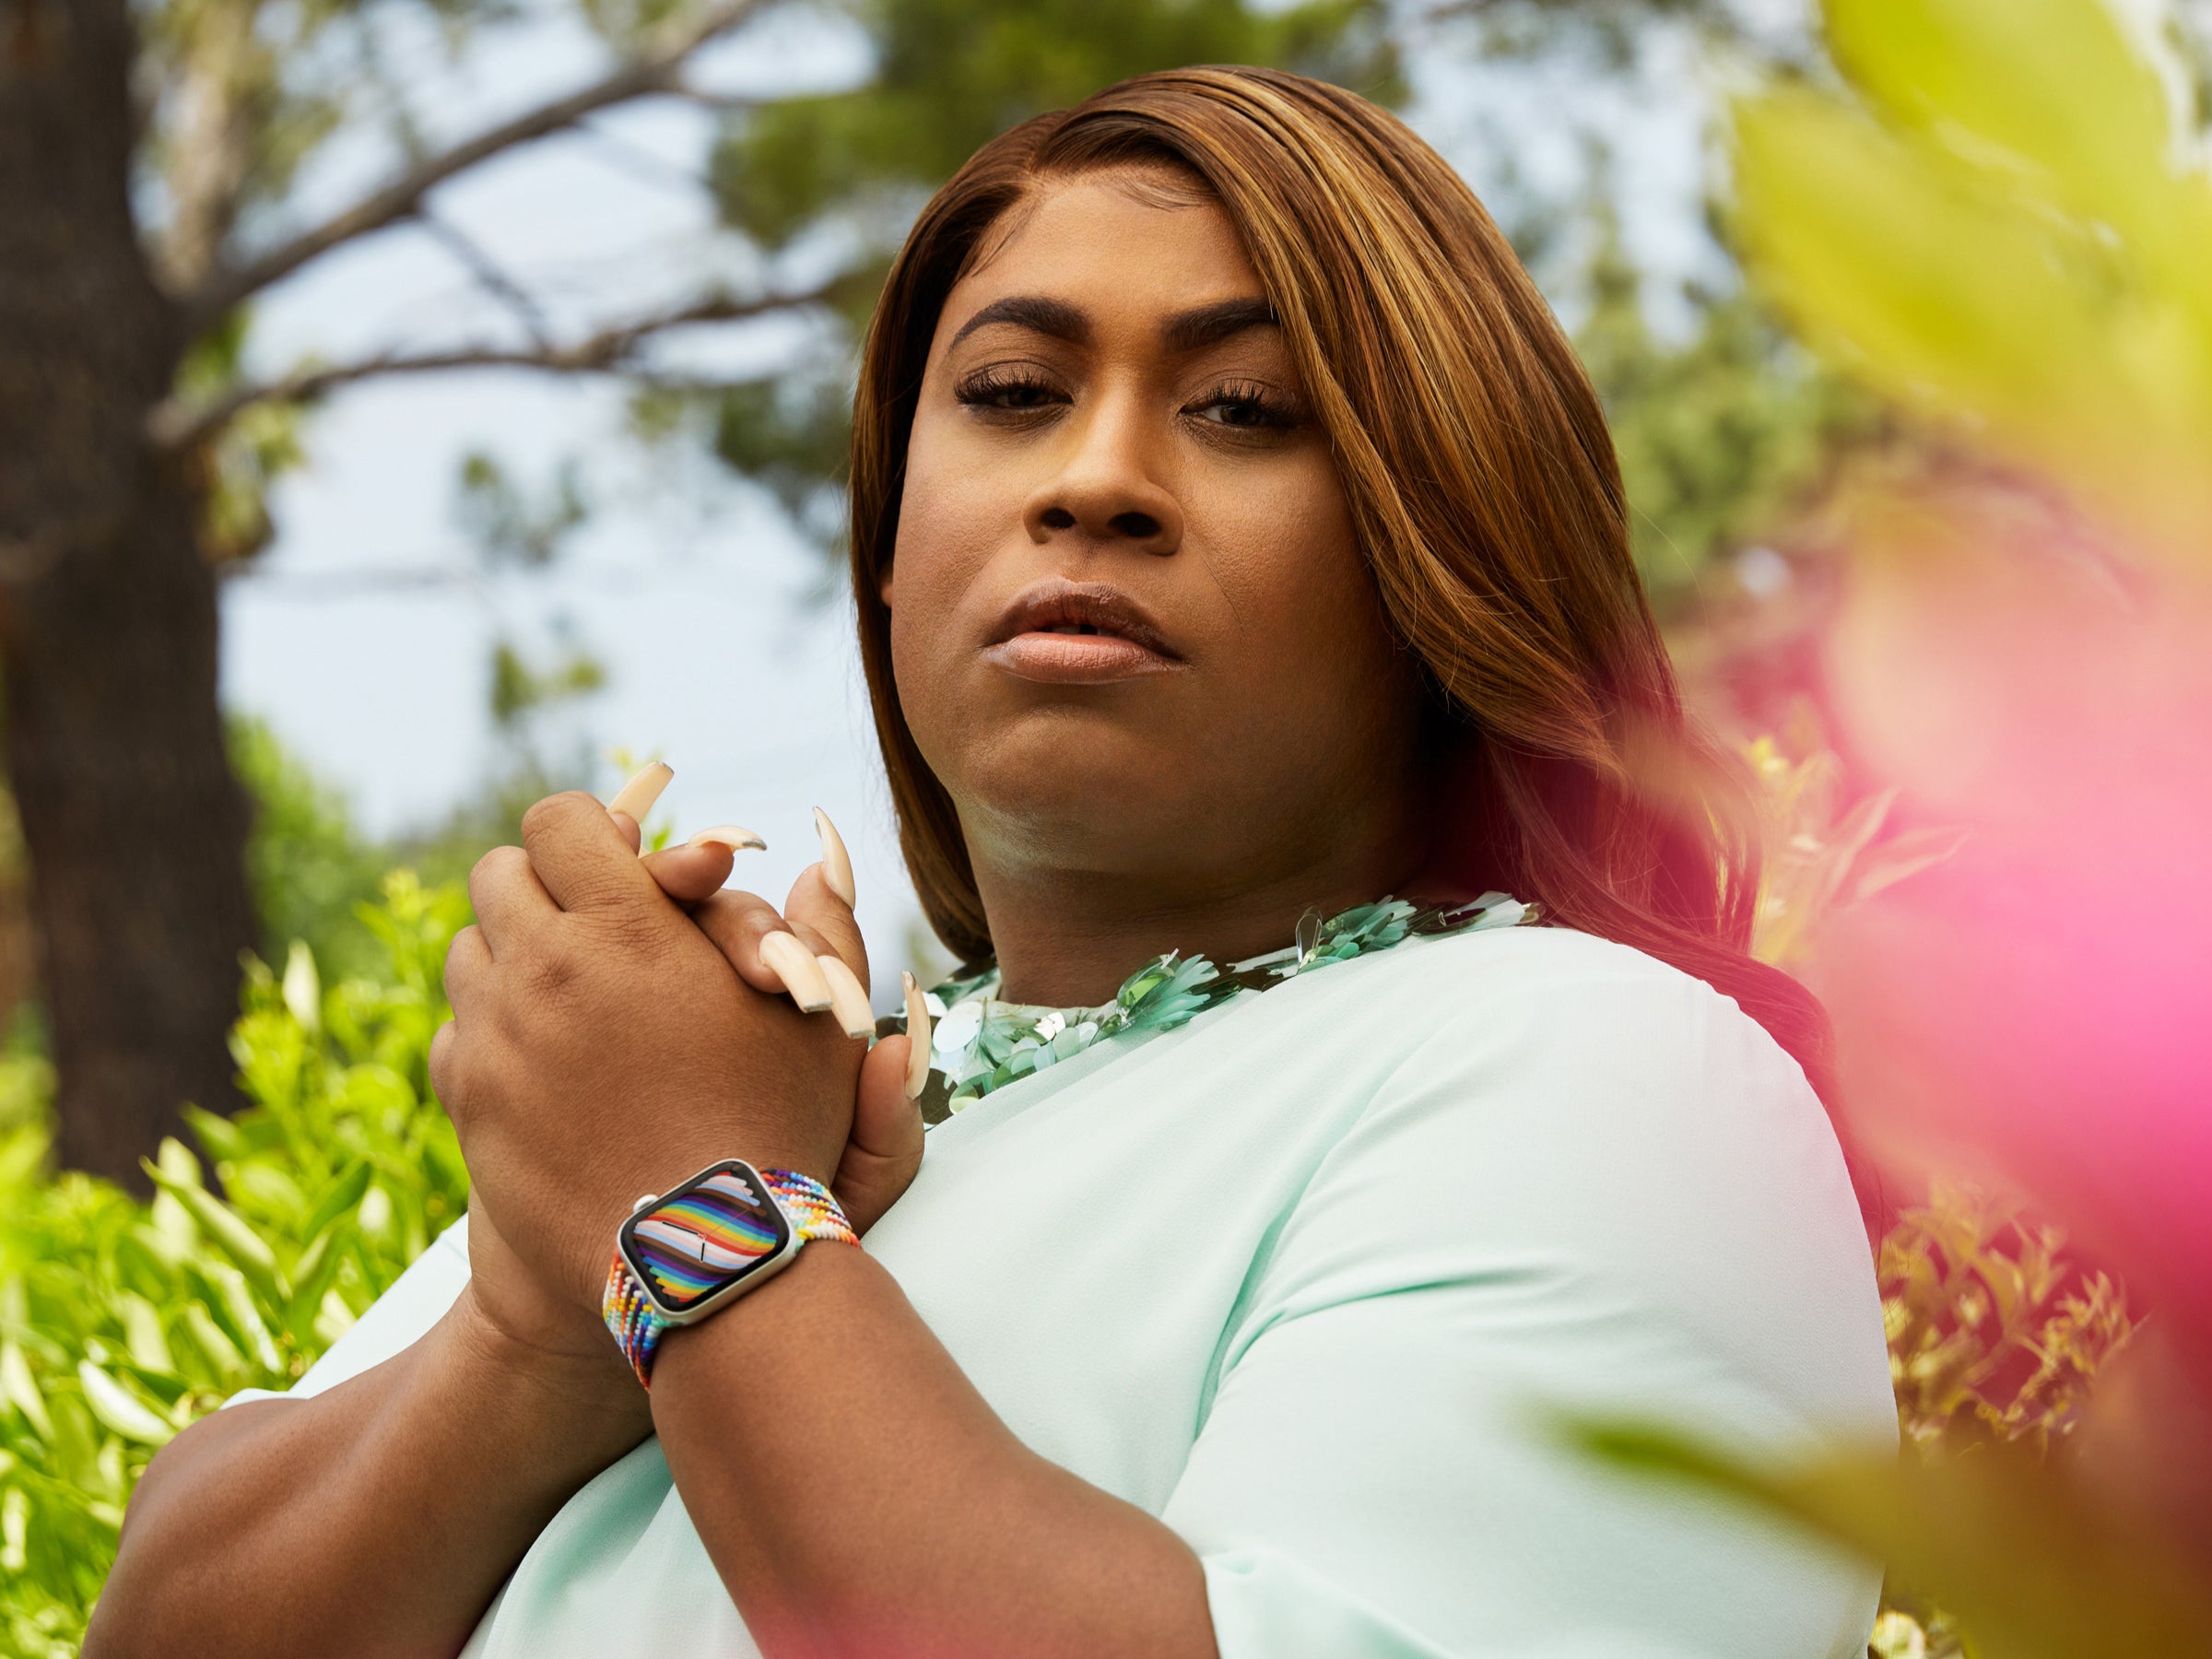 GLSEN board member and LGBTQ+ advocate, artist, and leader Dominique Morgan wears the new Pride Edition band